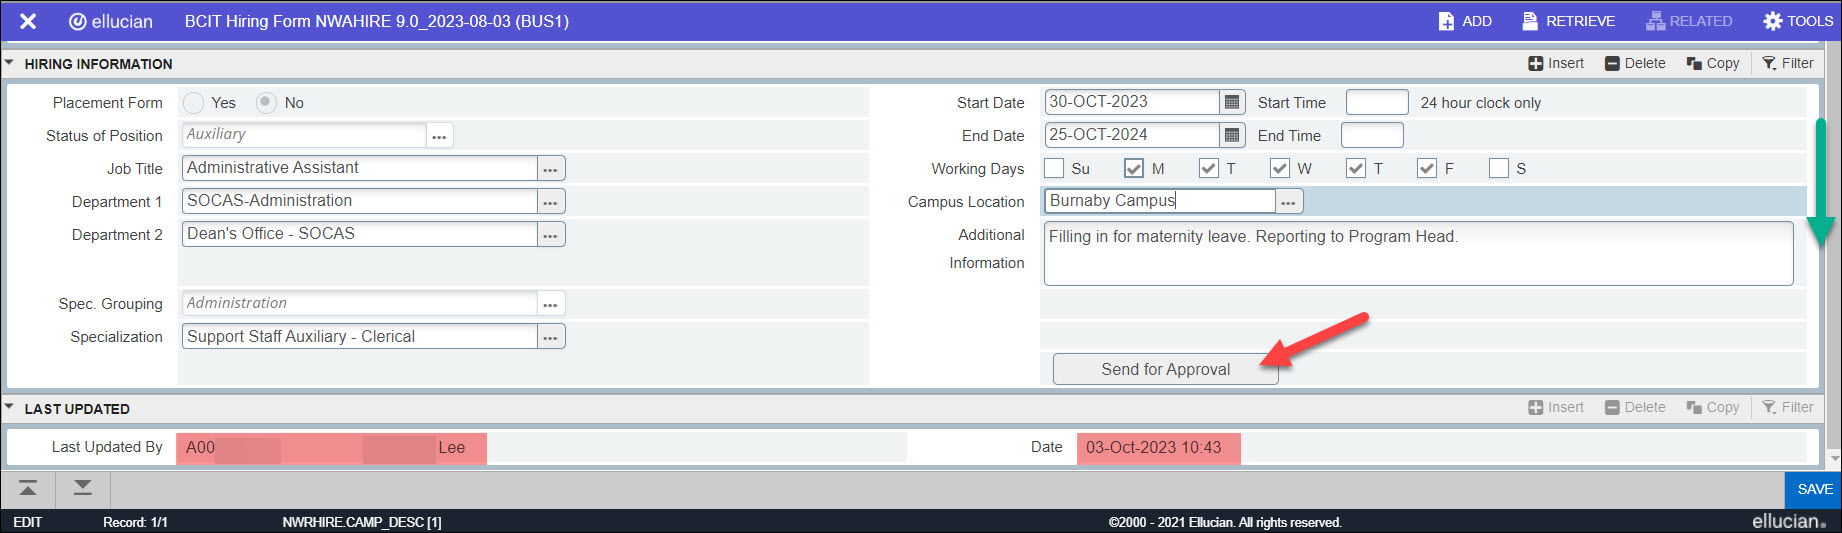 Screenshot Banner NWAHIRE Saved Successfully showing Last Updated by and Date